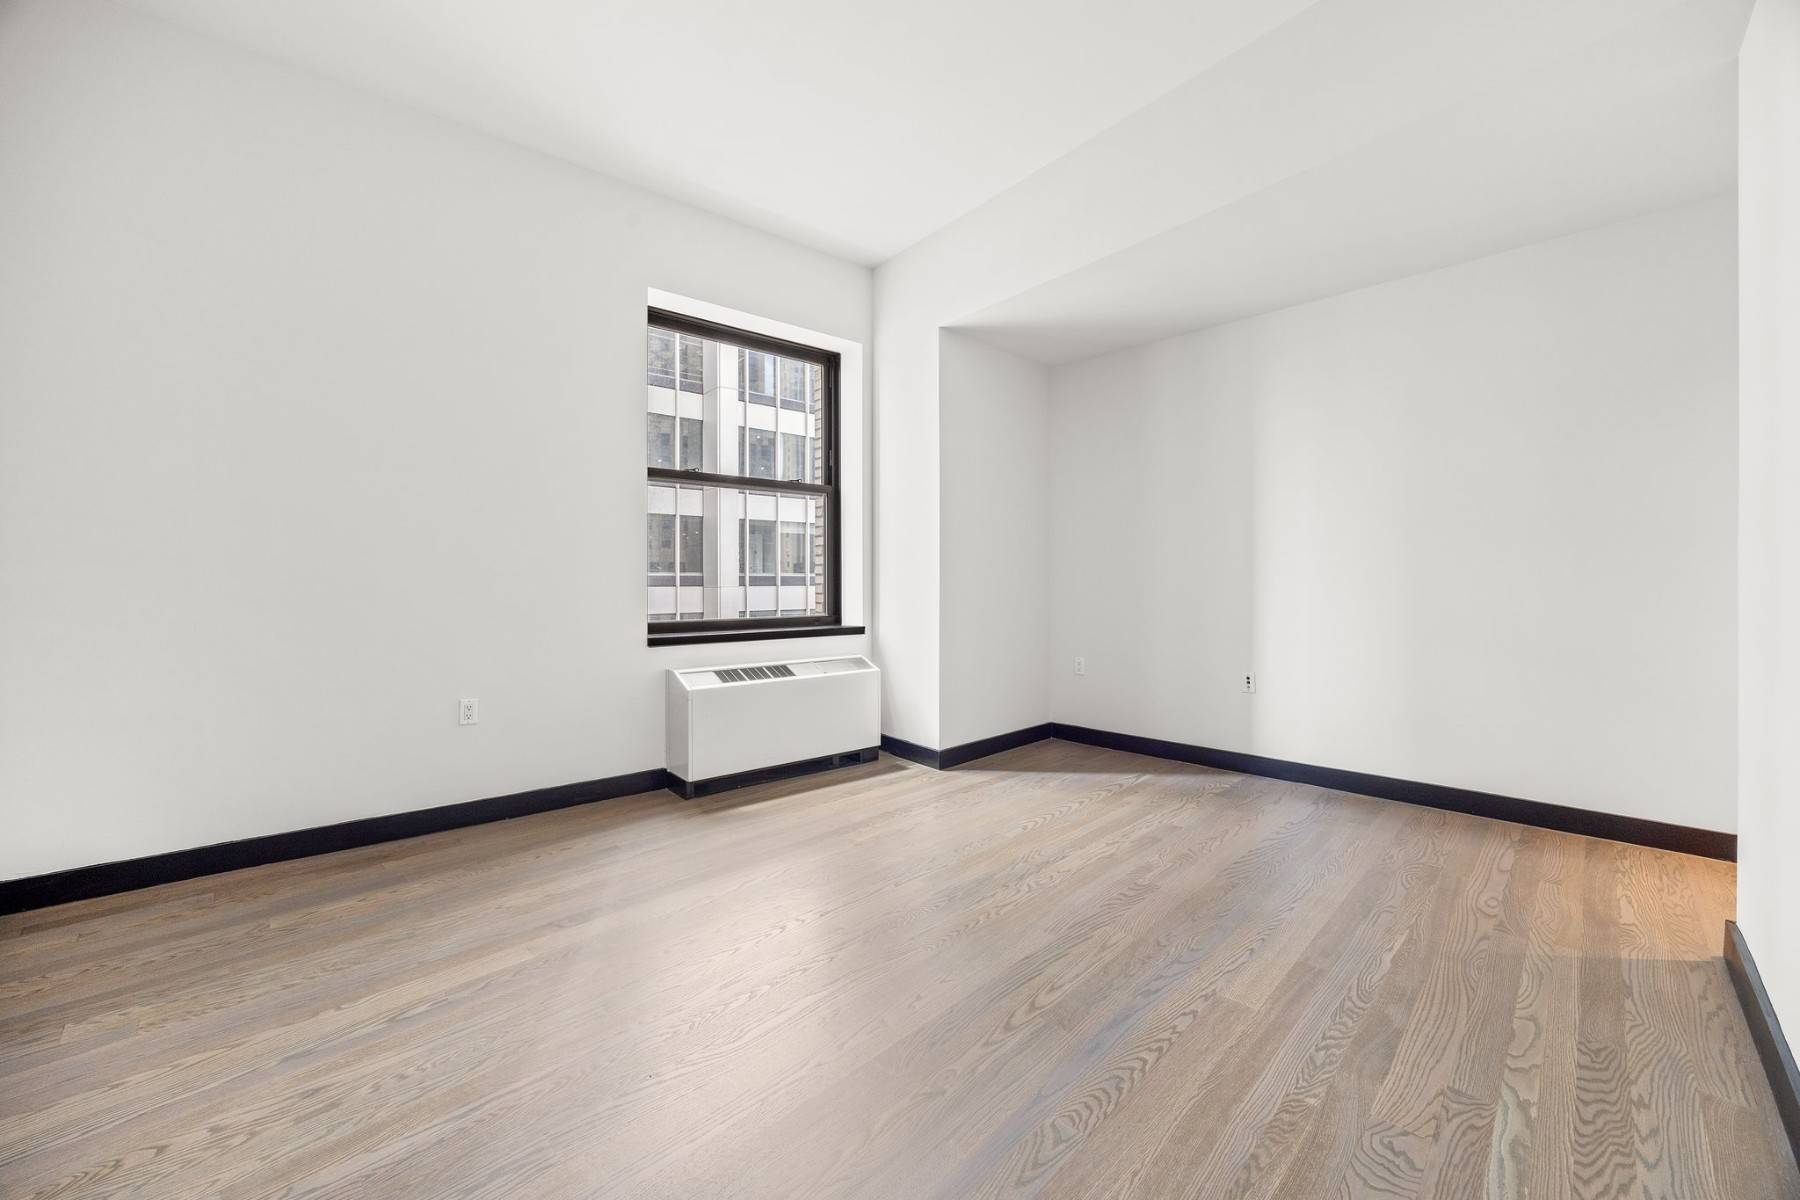 Welcome to this stunning 2 bedroom, 2 bathroom condo perched on the 29th floor of 20 Pine St.